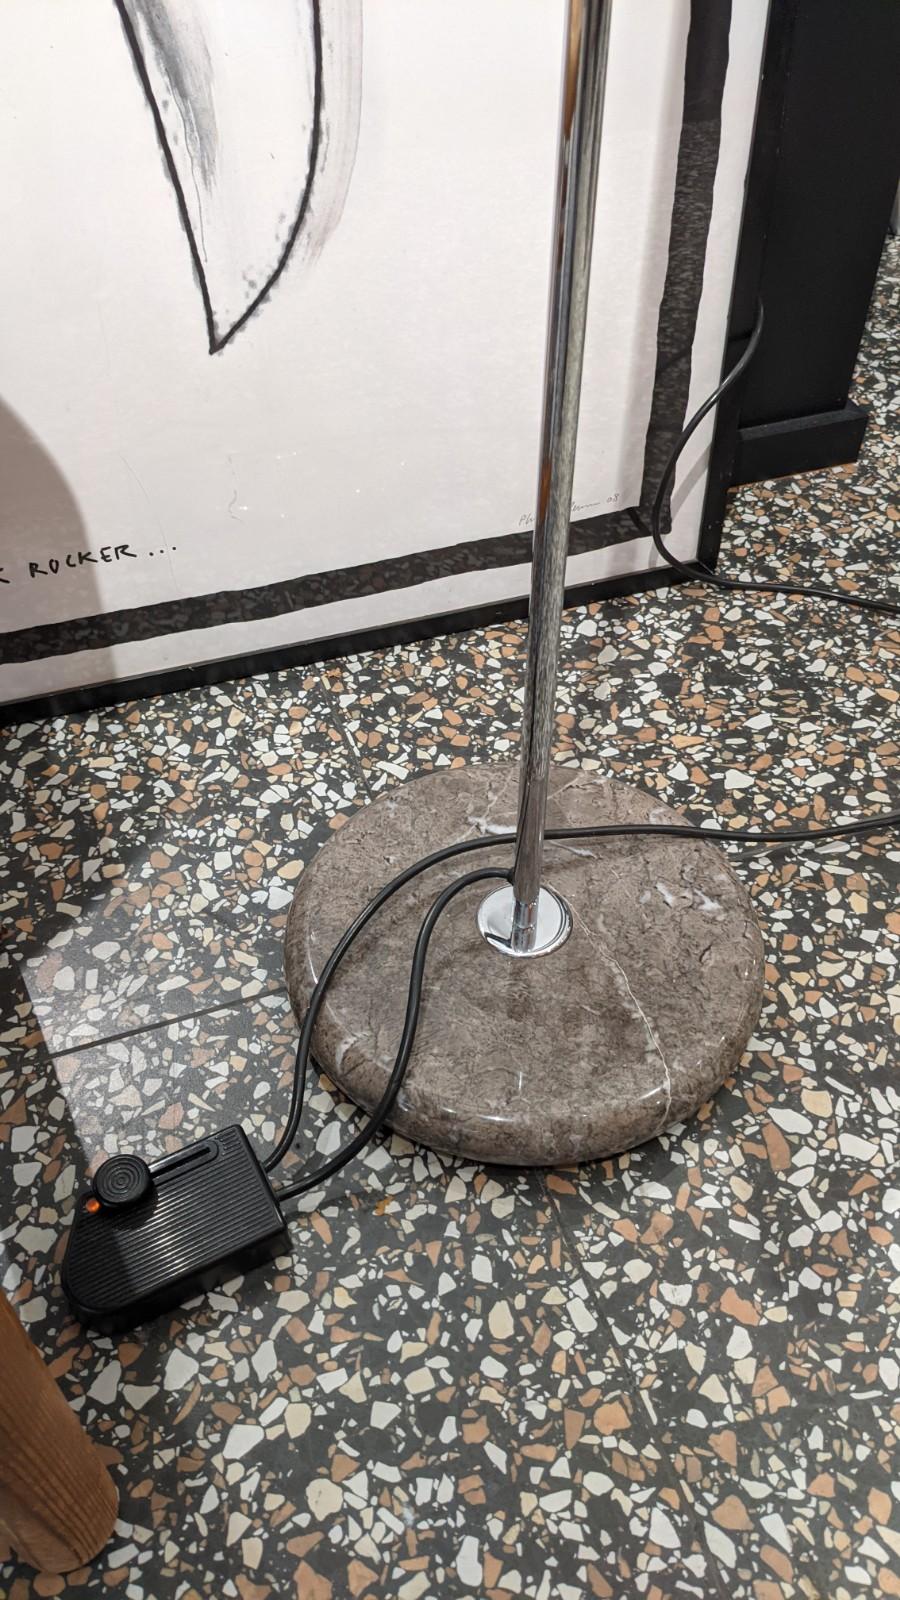 Floor lamp guzzini, brand visible on one of the pictures.
Rising and falling system and adjustable. 
Mondragone marble foot, stainless steel tube and plastic white and black lamp.

This floor lamp is very bright for the private area and for the